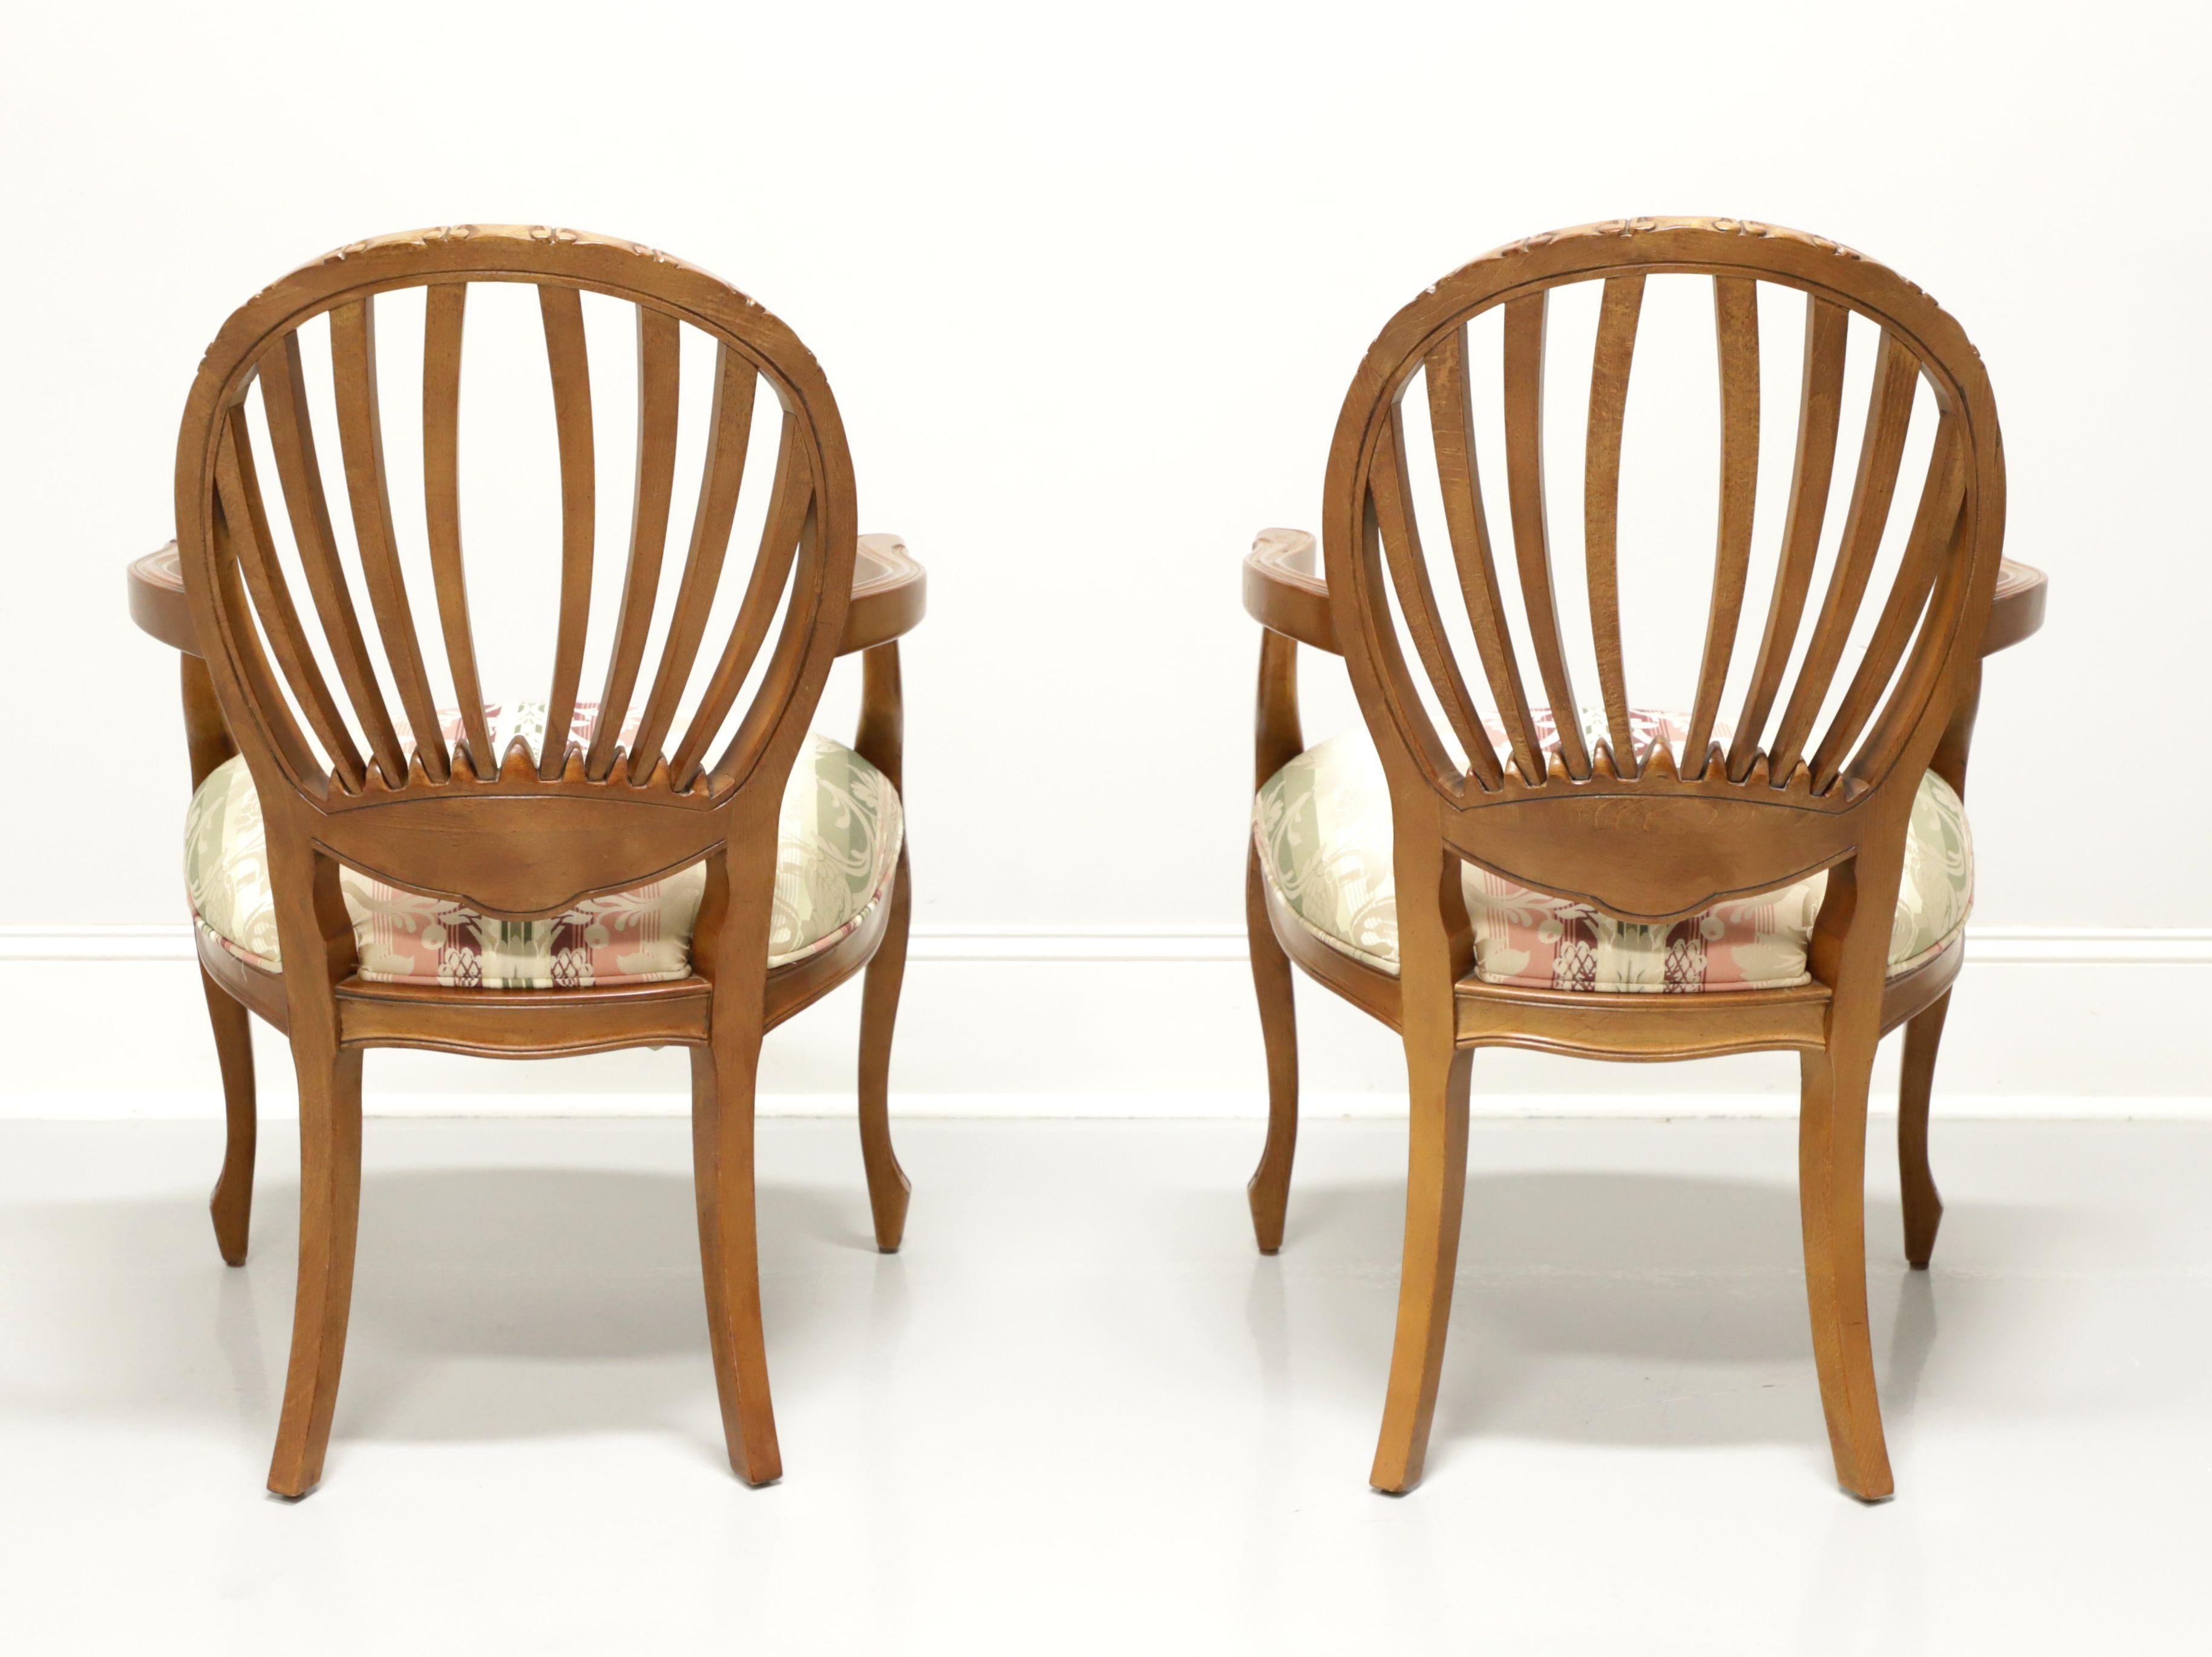 CENTURY French Country Oval Back Dining Armchairs - Pair In Good Condition For Sale In Charlotte, NC